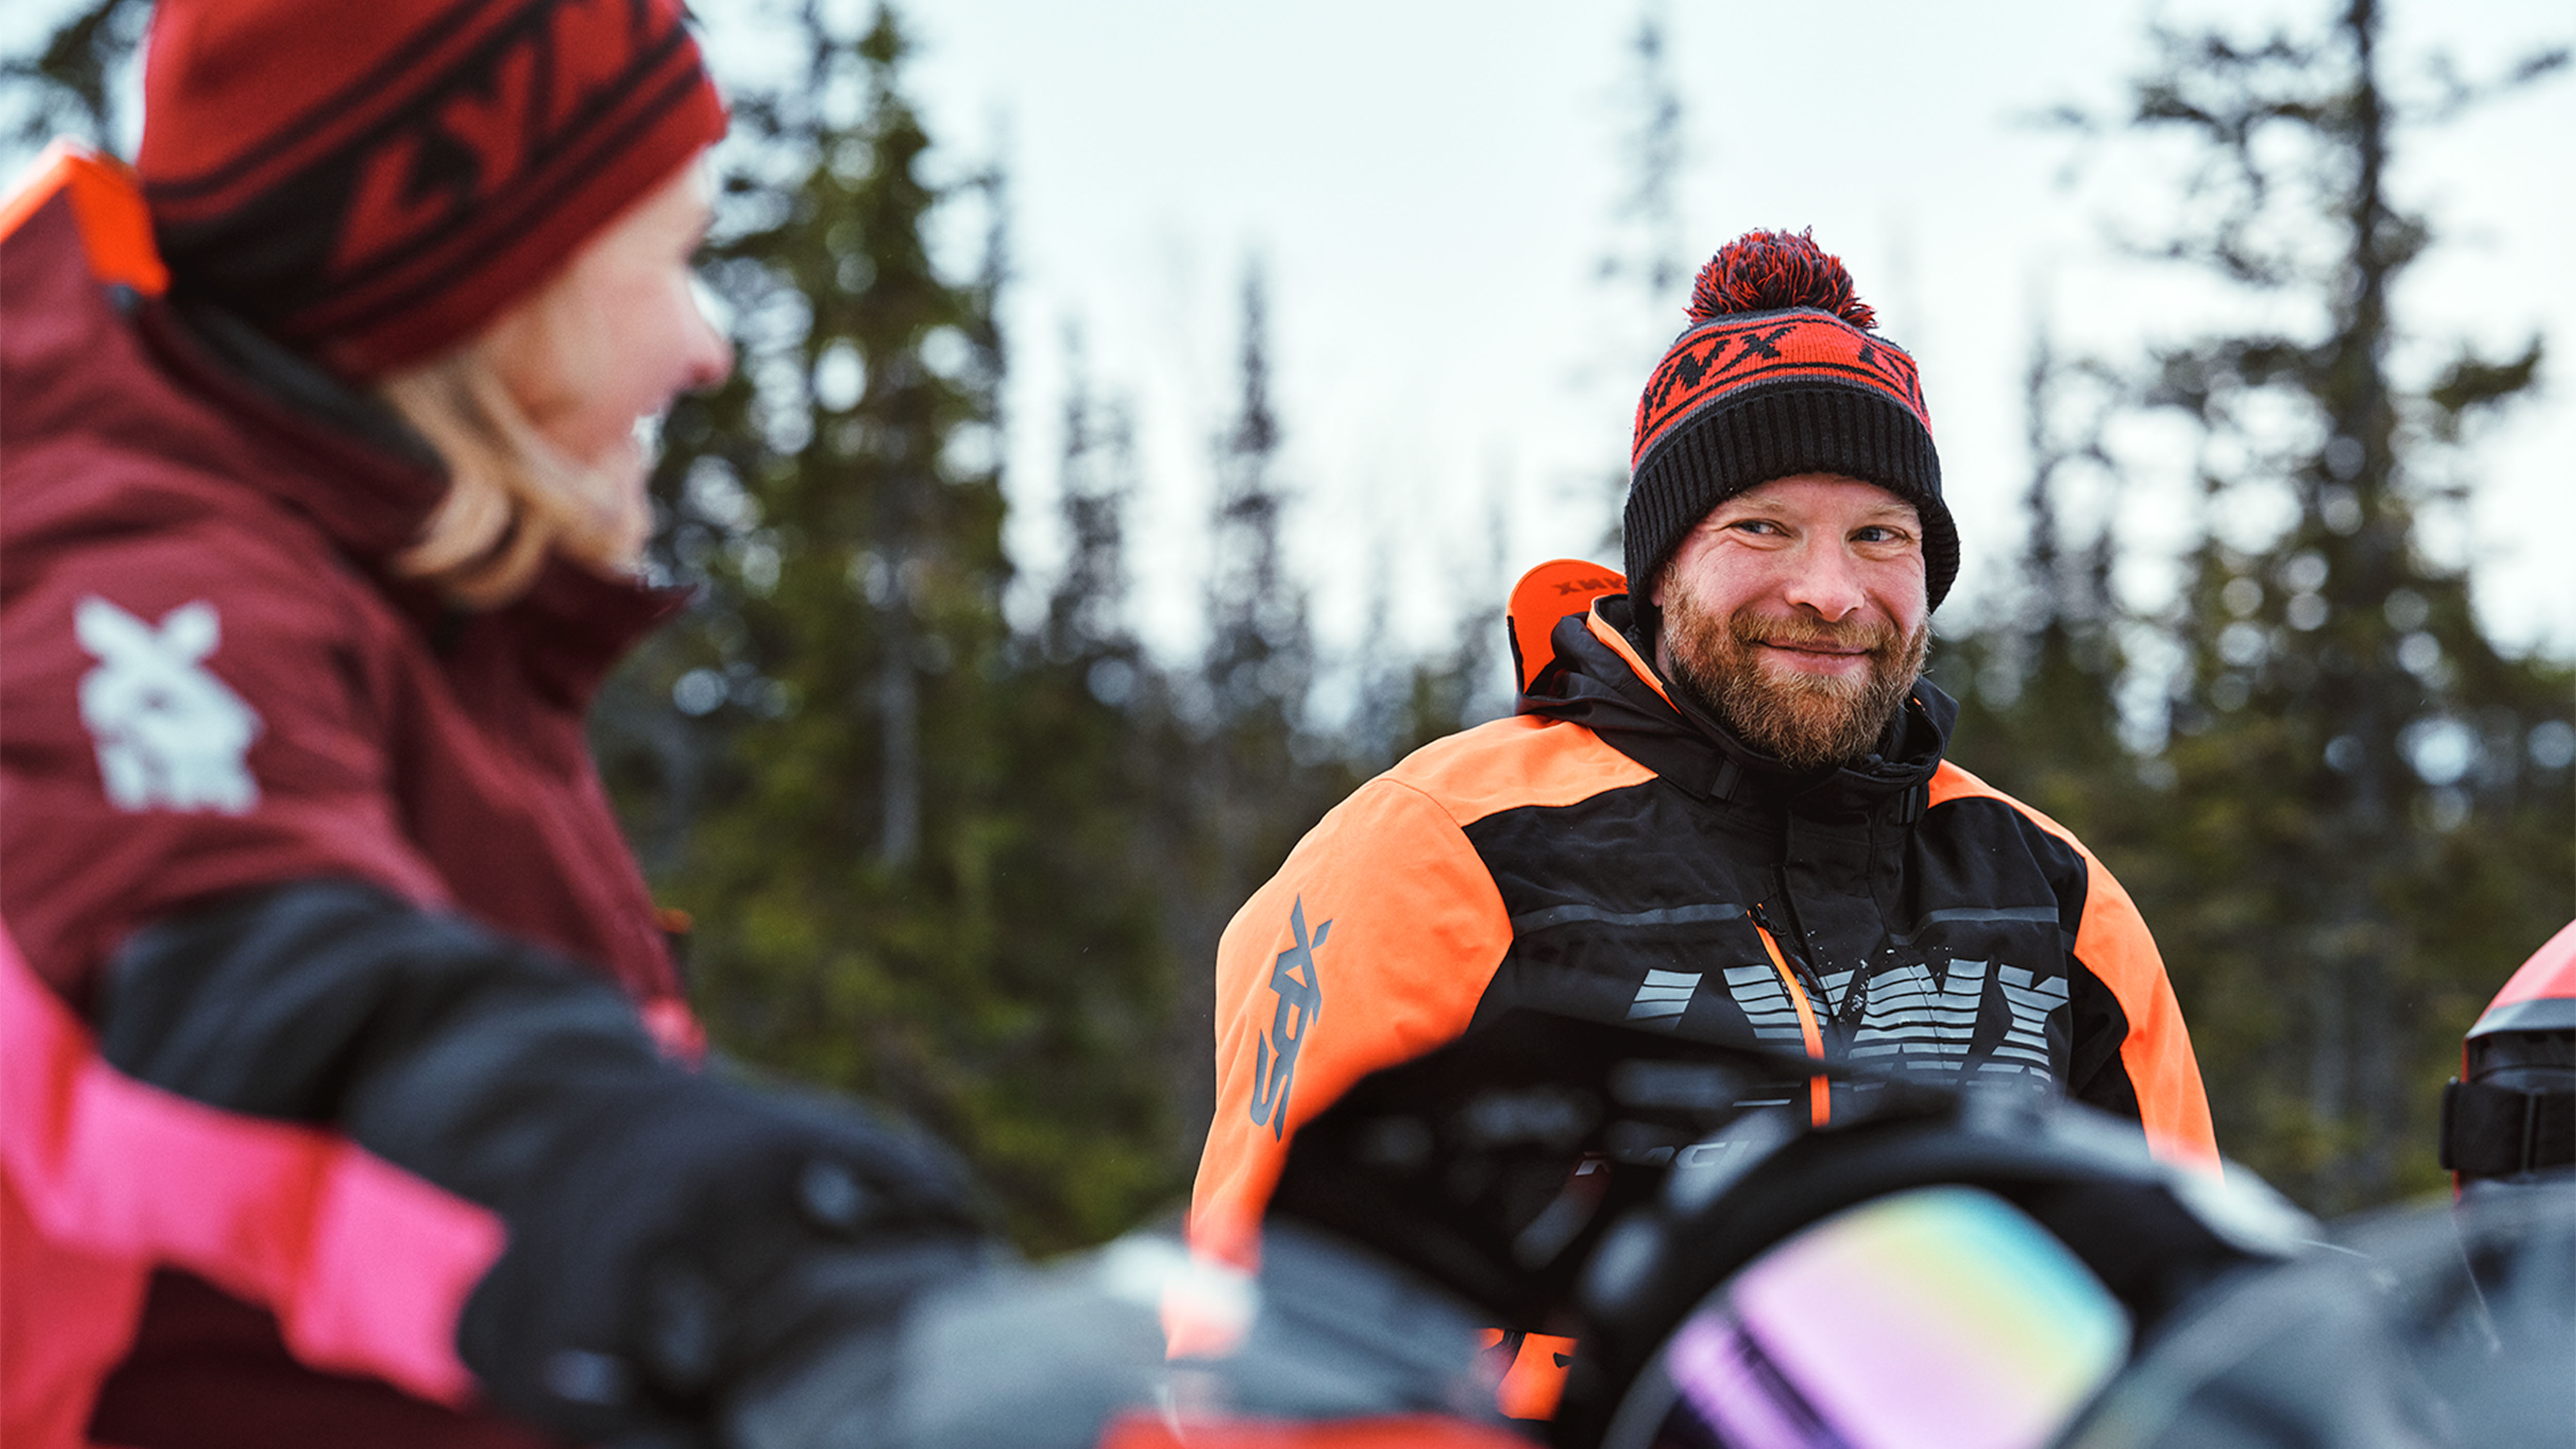 Woman and man chatting on snowmobiles in Lynx riding apparel